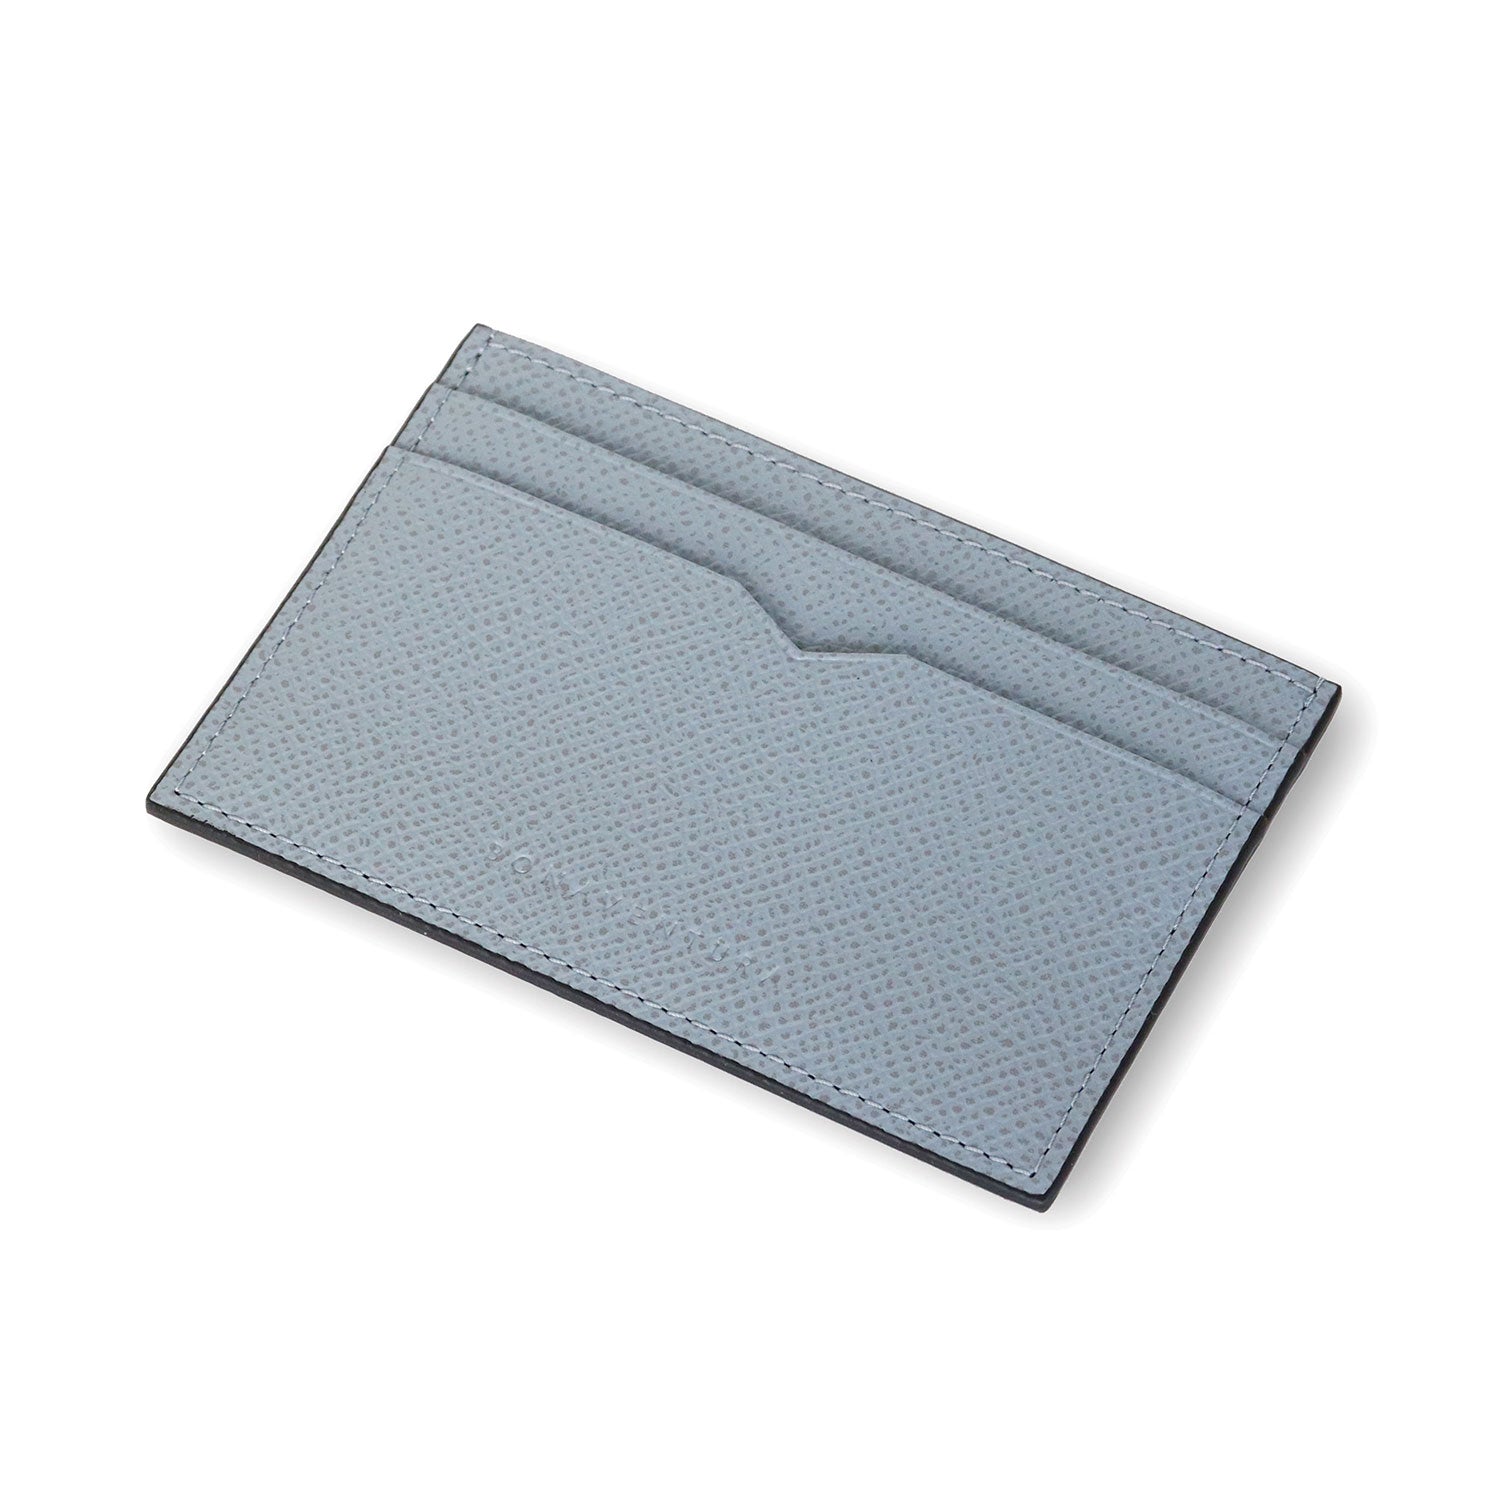 Slim card case in Noblesse leather